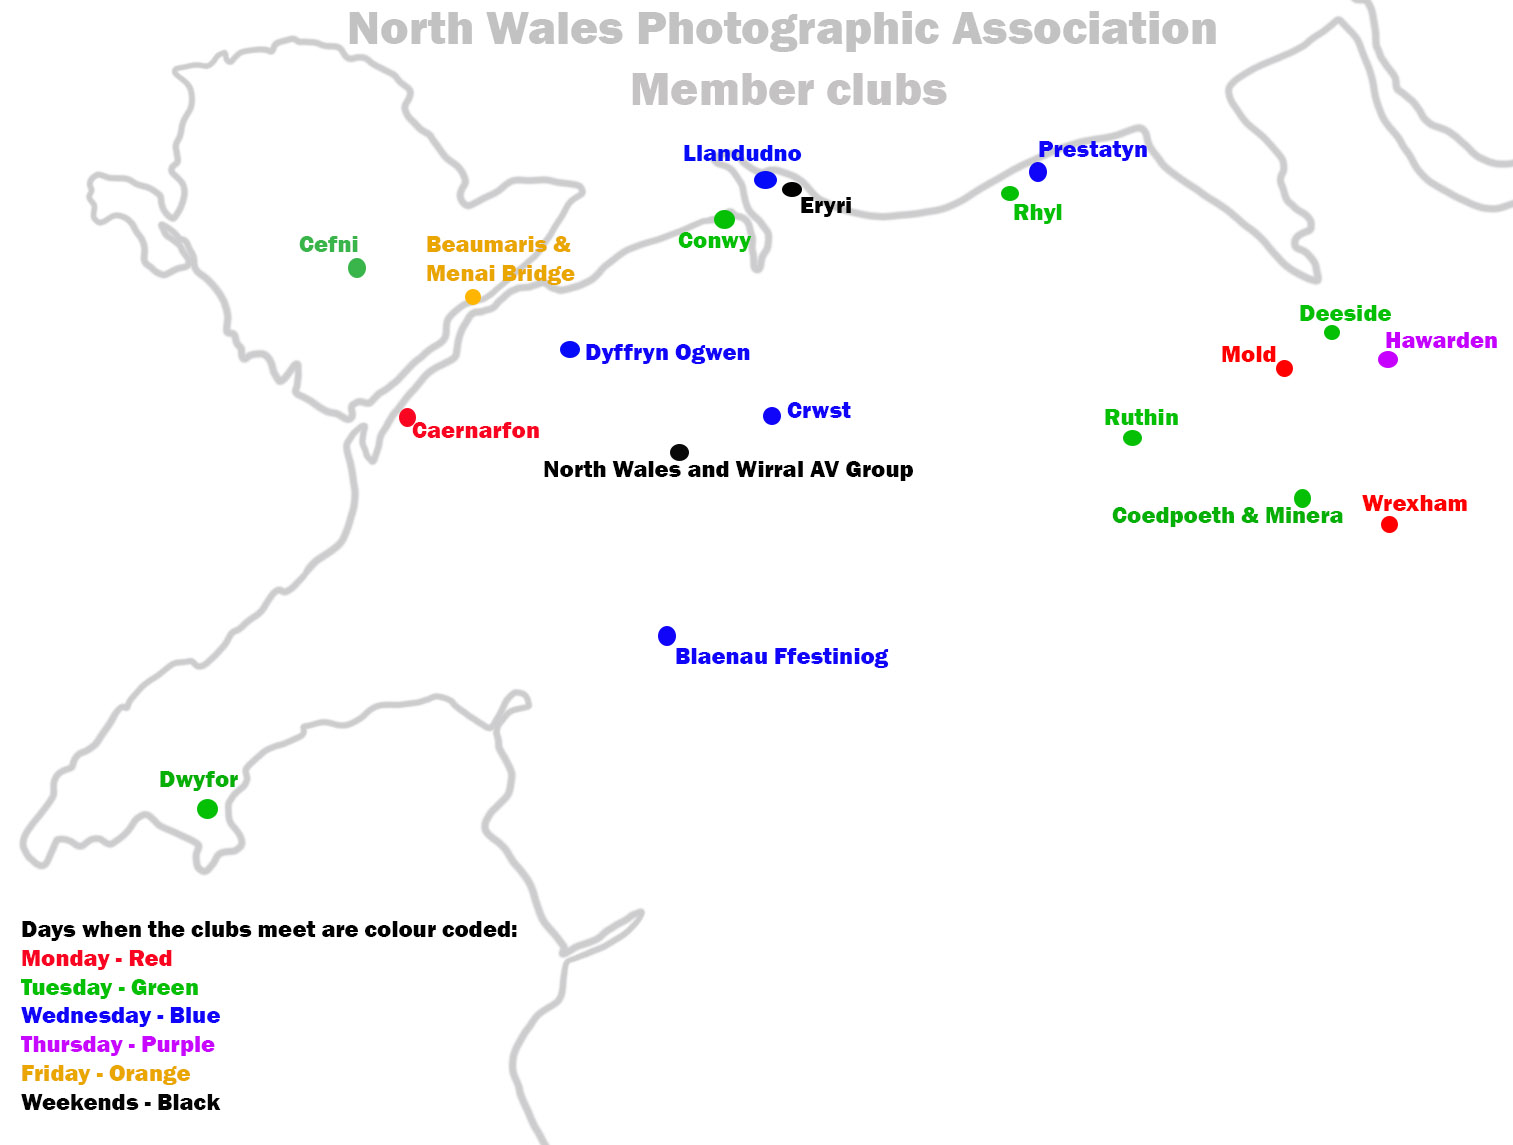 NWPA Map of Member clubs 